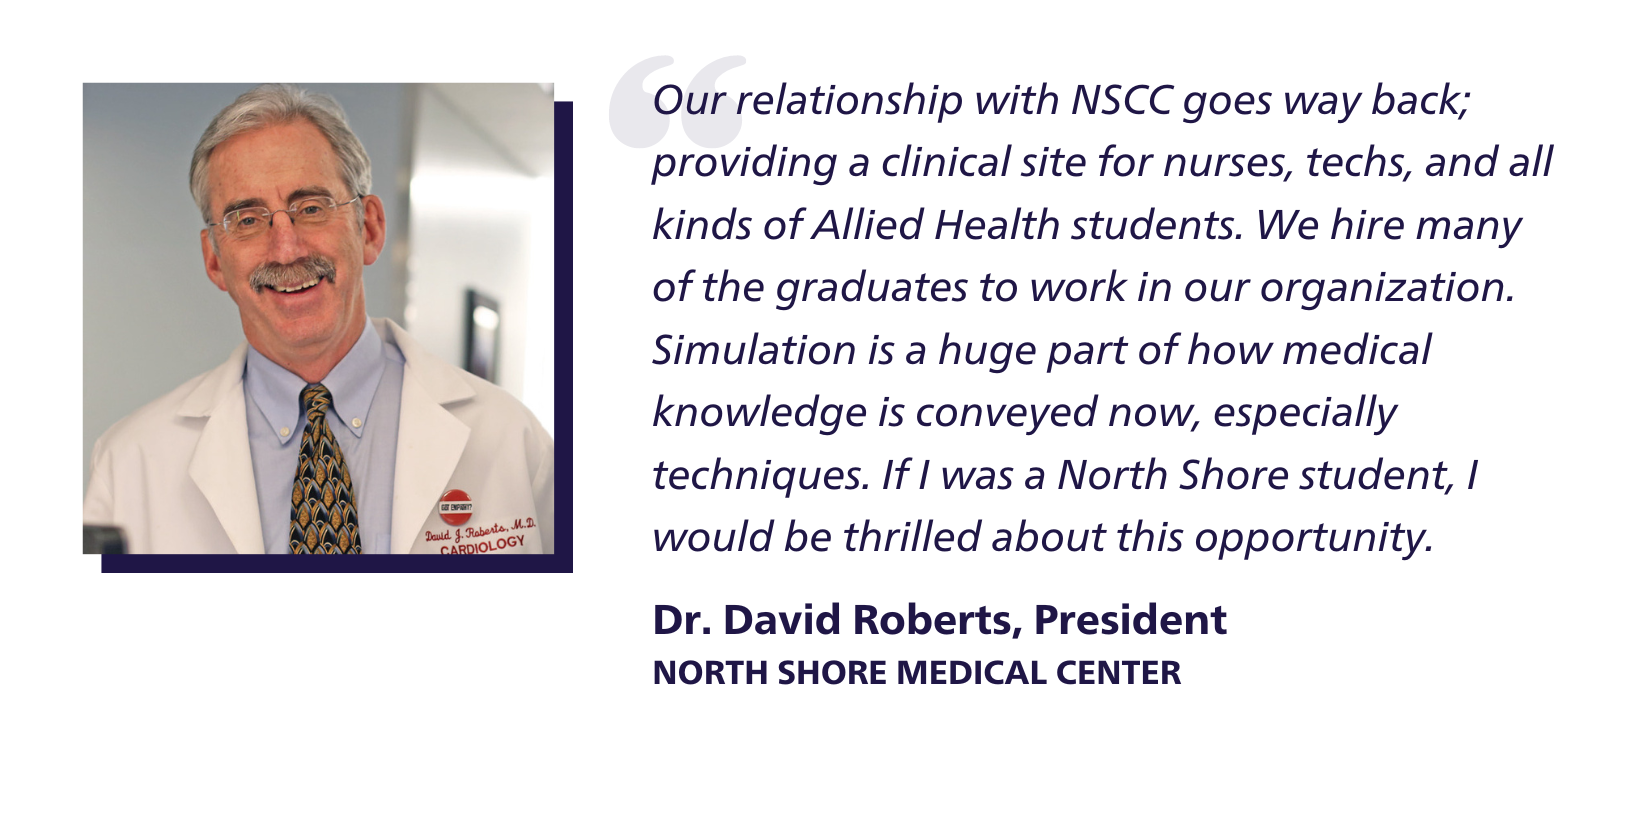 Quote: Our relationship with NSCC goes way back; providing a clinical site for nurses, techs, and all kinds of Allied Health students. We hire many of the graduates to work in our organization. Simulation is a huge part of how medical knowledge is conveyed now, especially techniques. If I was a North Shore student, I would be thrilled about this opportunity. Dr. David Roberts, President
North Shore Medical Center